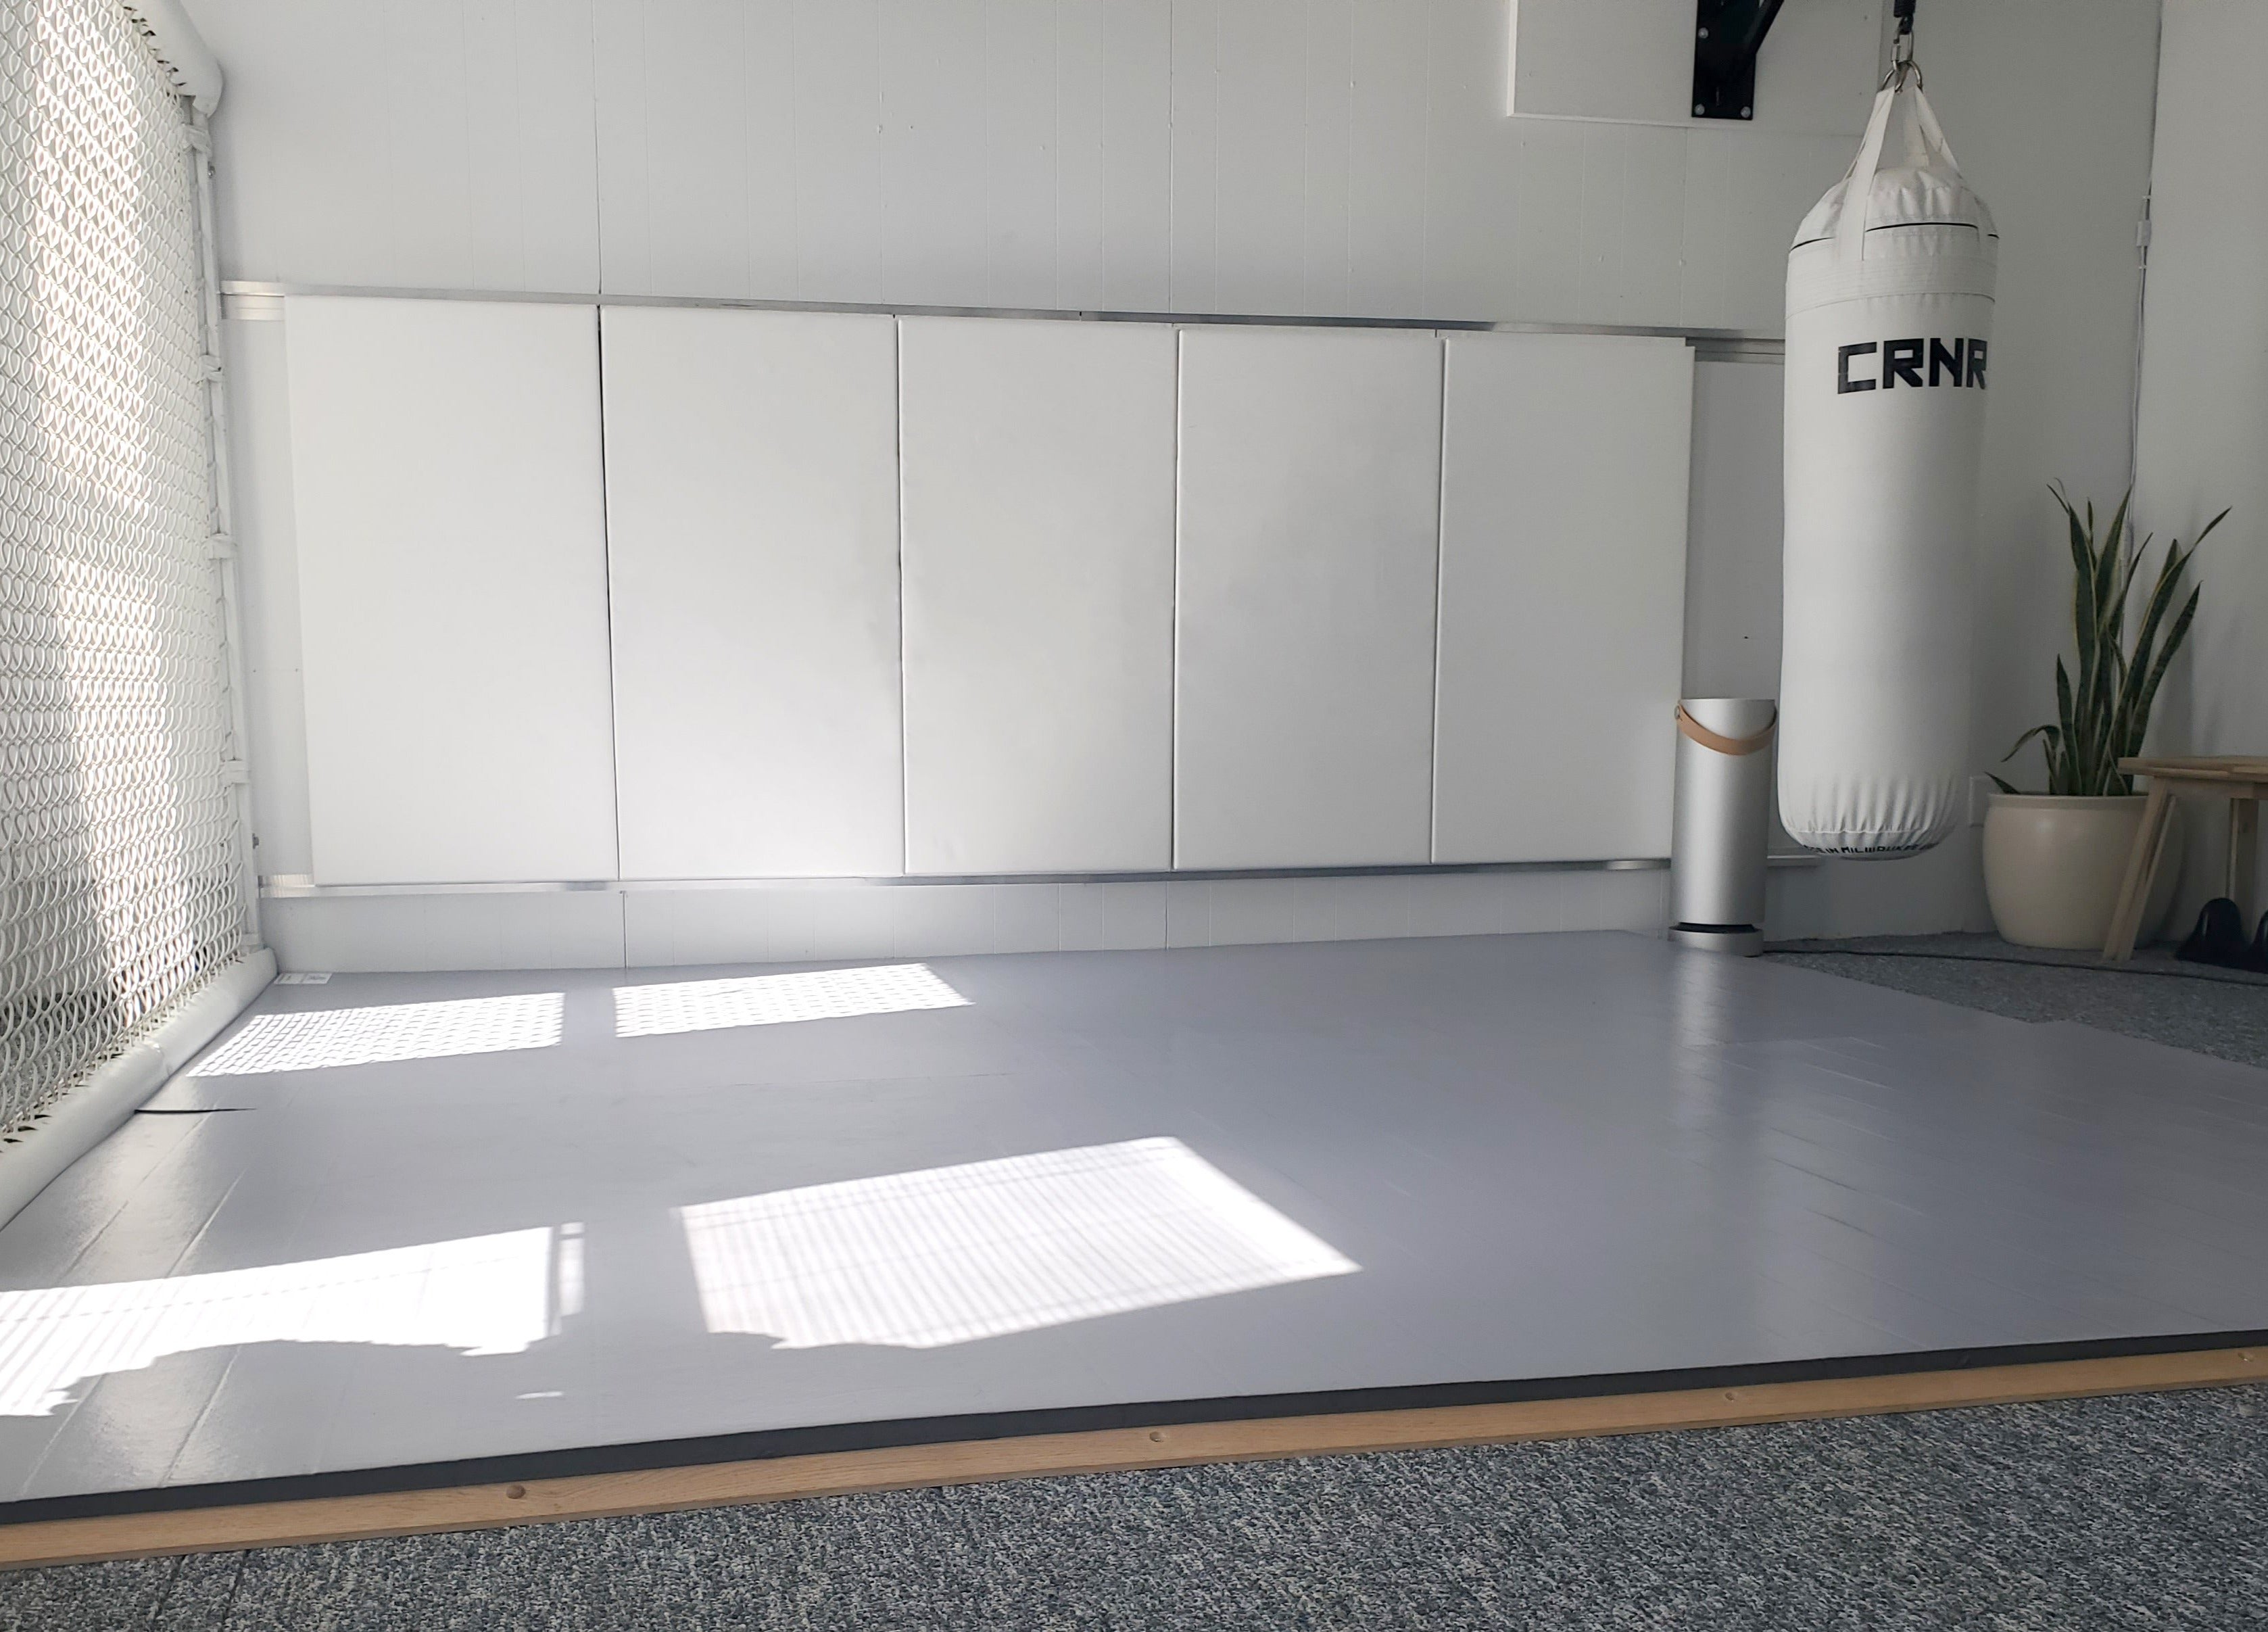 Home MMA Gym feature AK Athletics Grey Wrestling Mats and White Wall Pads